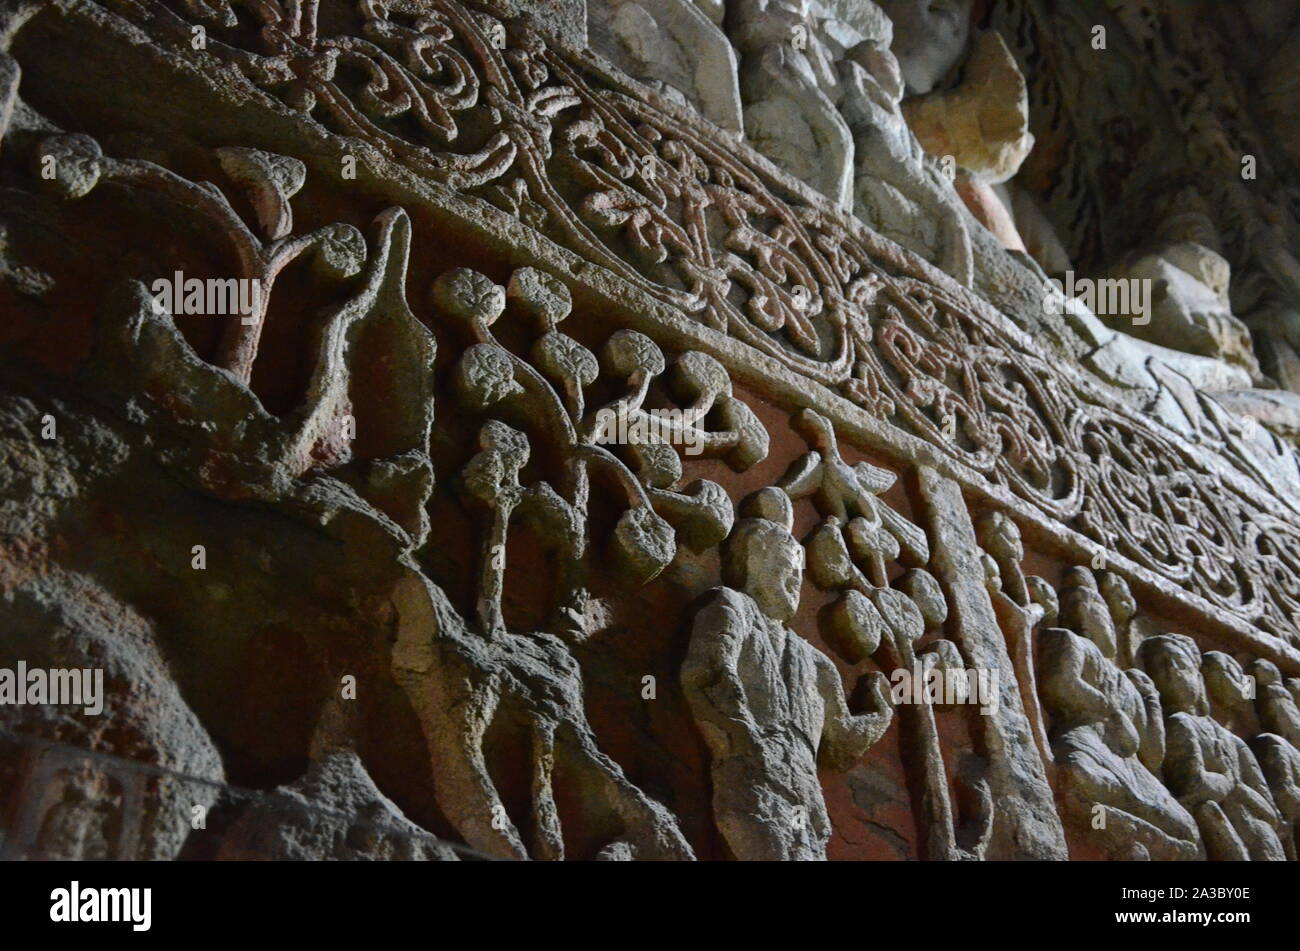 The view of the ancient wall carvings Stock Photo